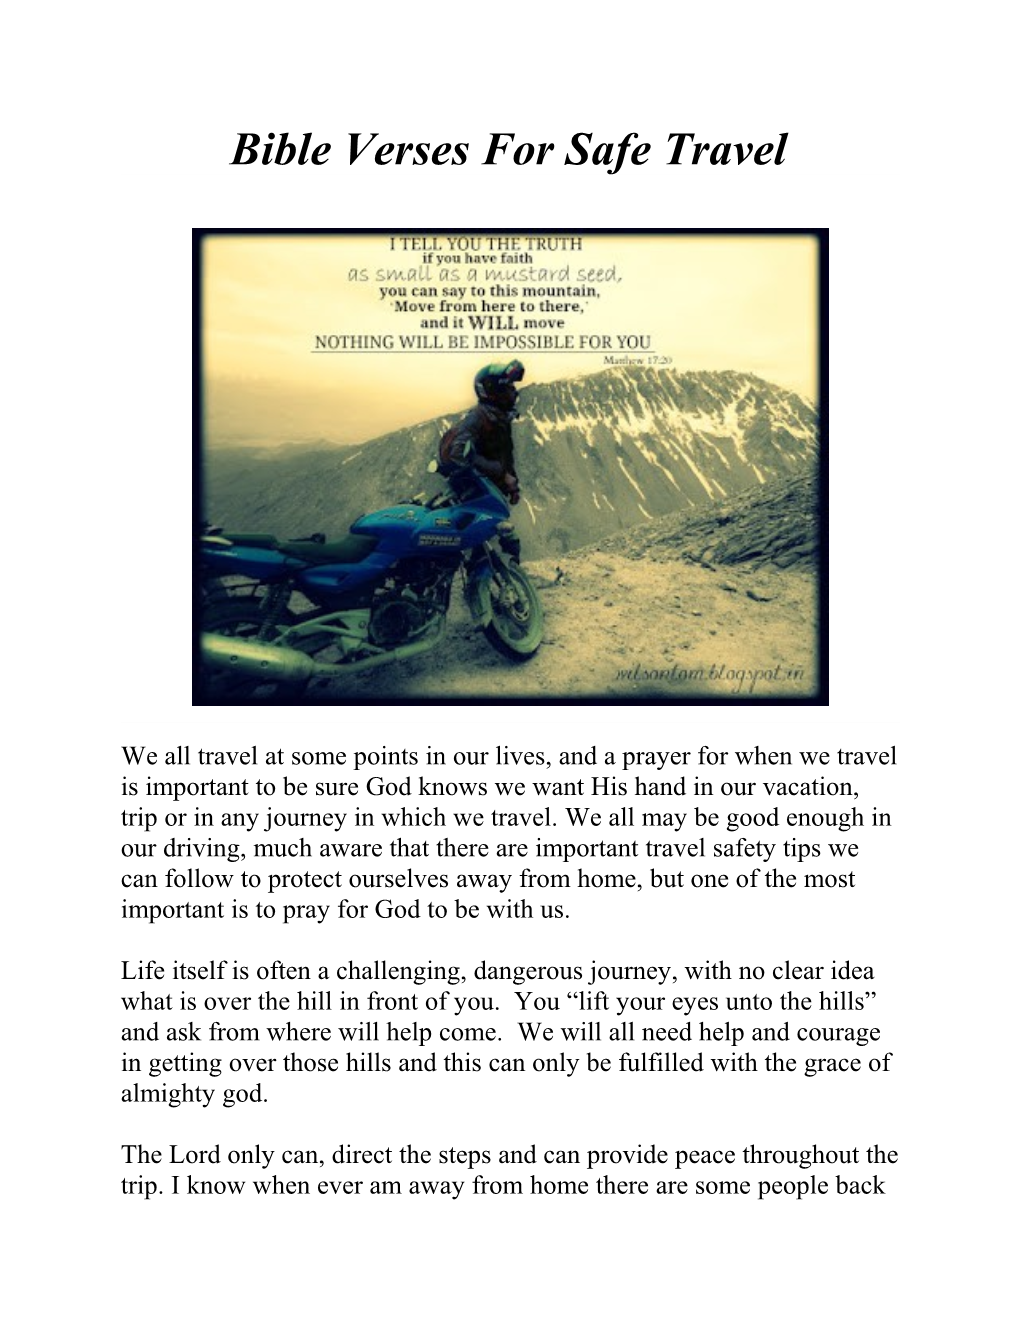 Bible Verses for Safe Travel